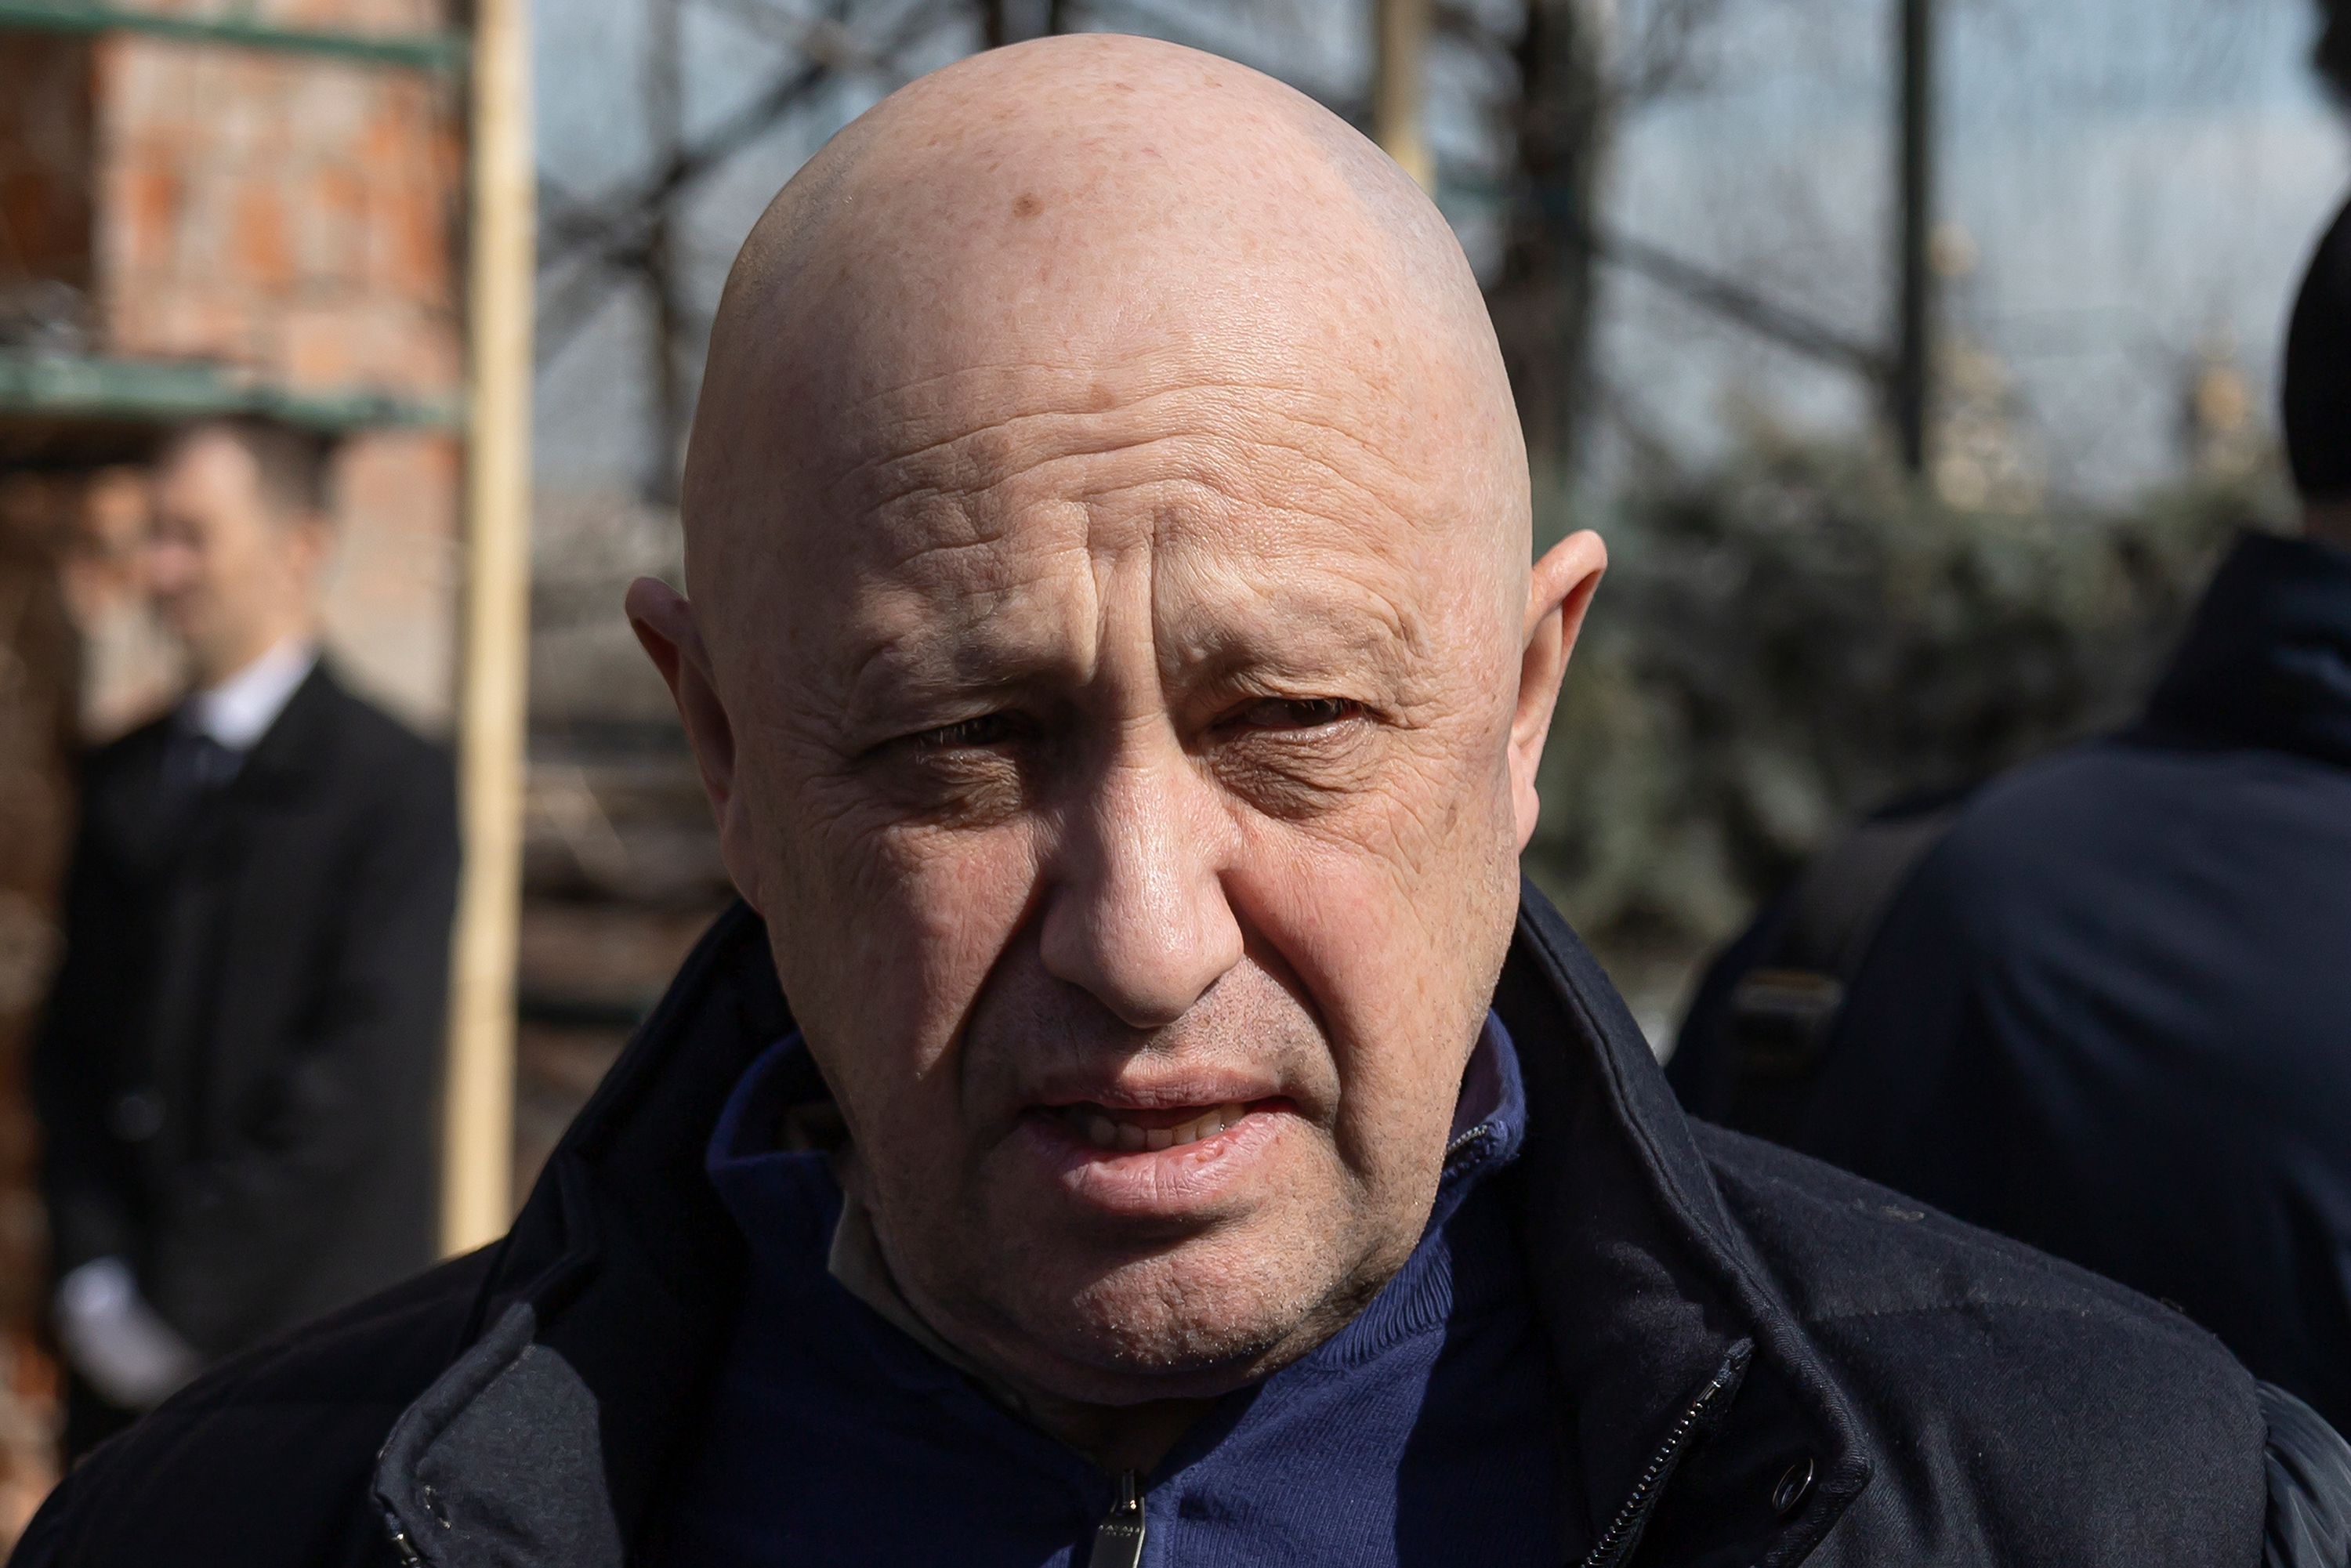 Yevgeny Prigozhin, the owner of the Wagner Group military company, arrives during a funeral ceremony at the Troyekurovskoye cemetery in Moscow, Russia, on April 8.